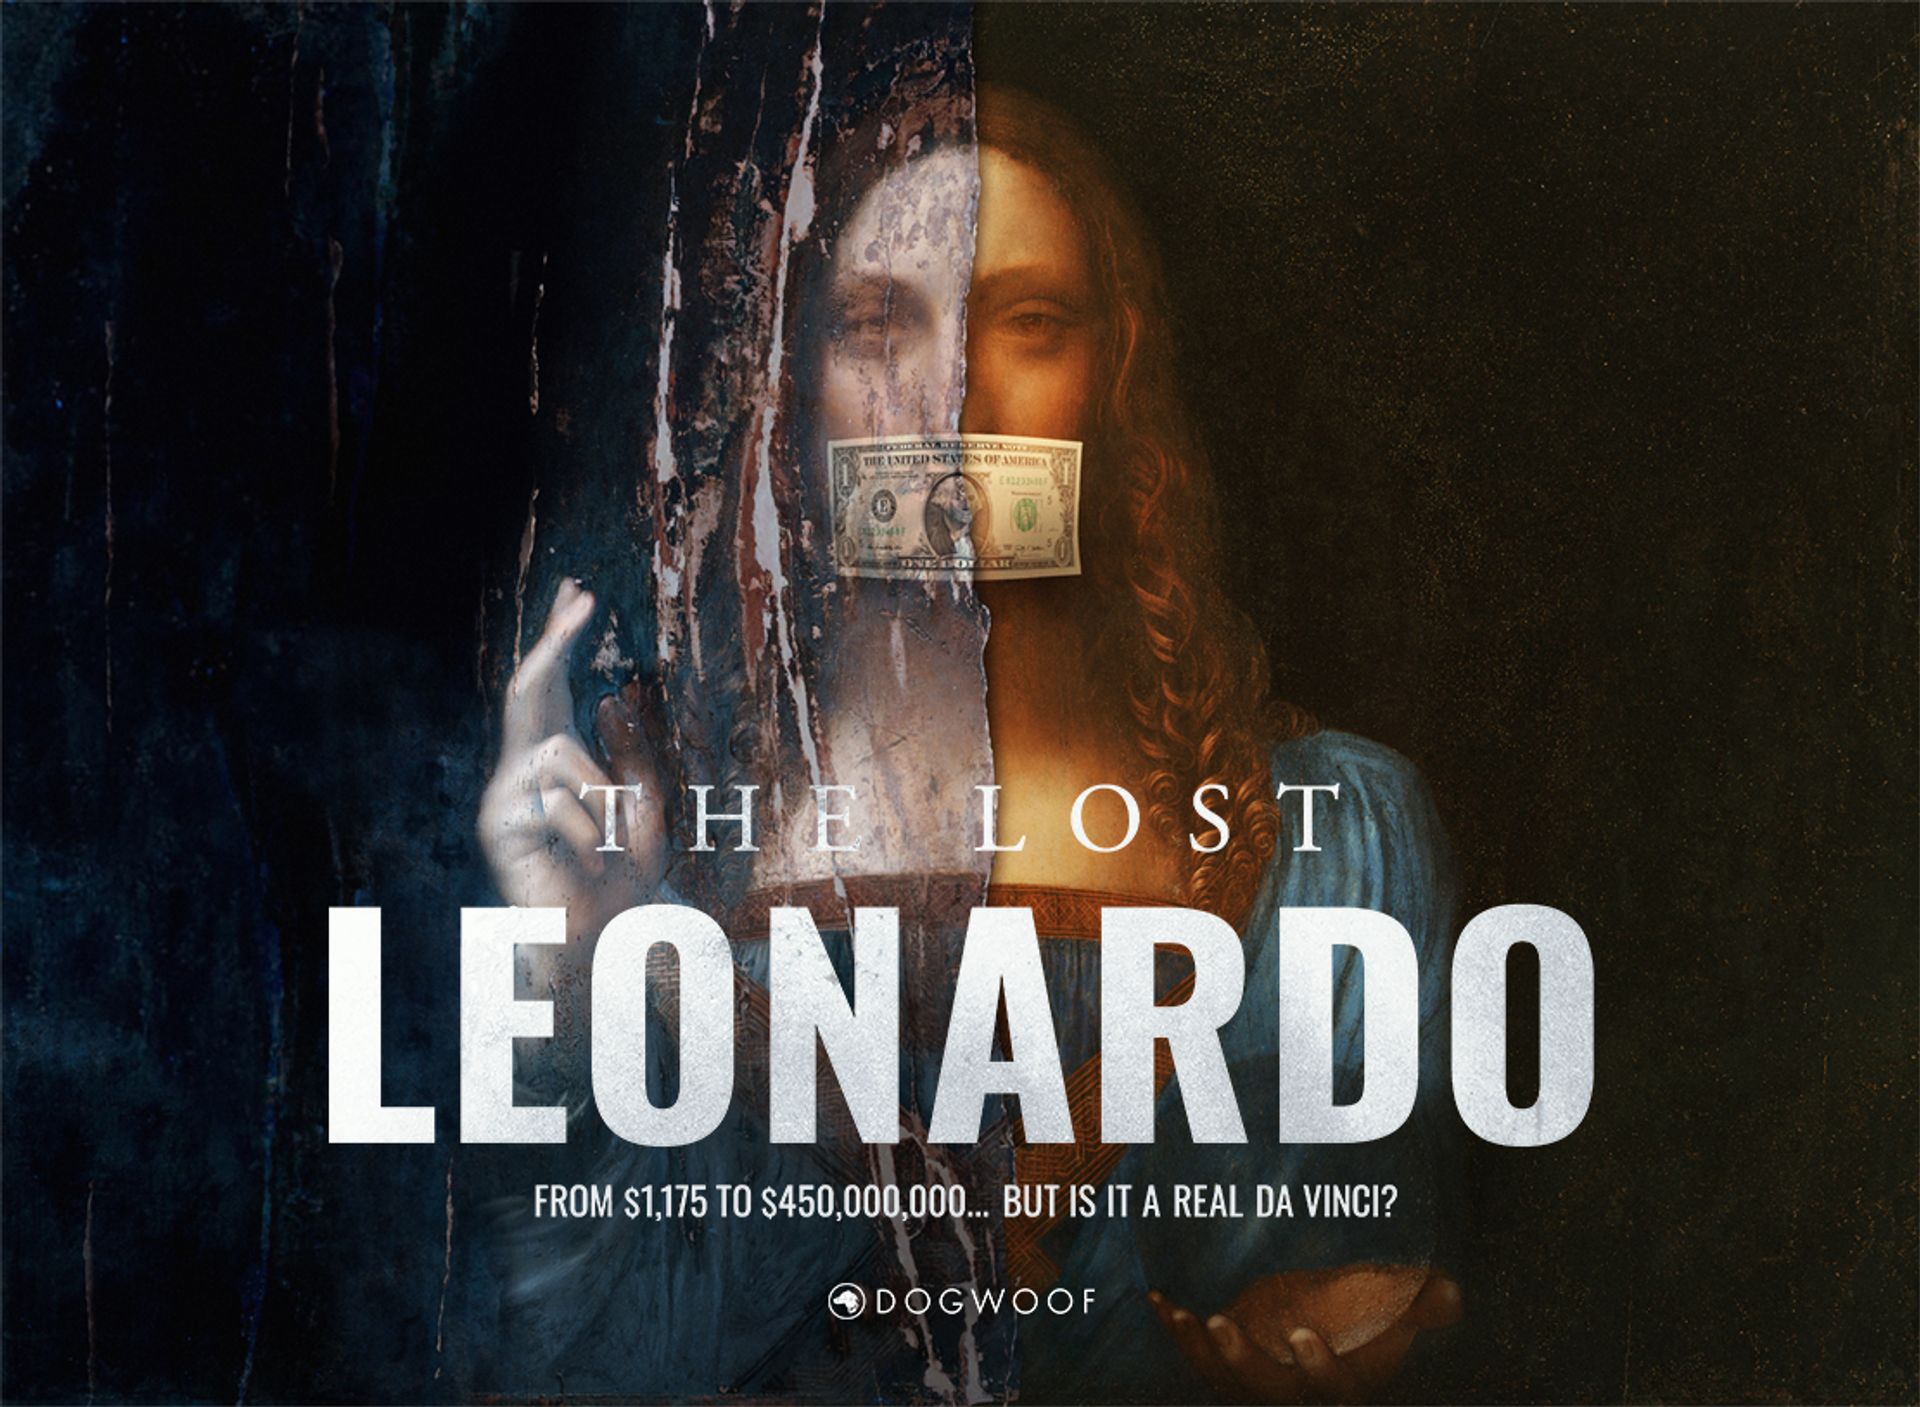 The Lost Leonardo film will preview at the Curzon Mayfair in London on 8 September 